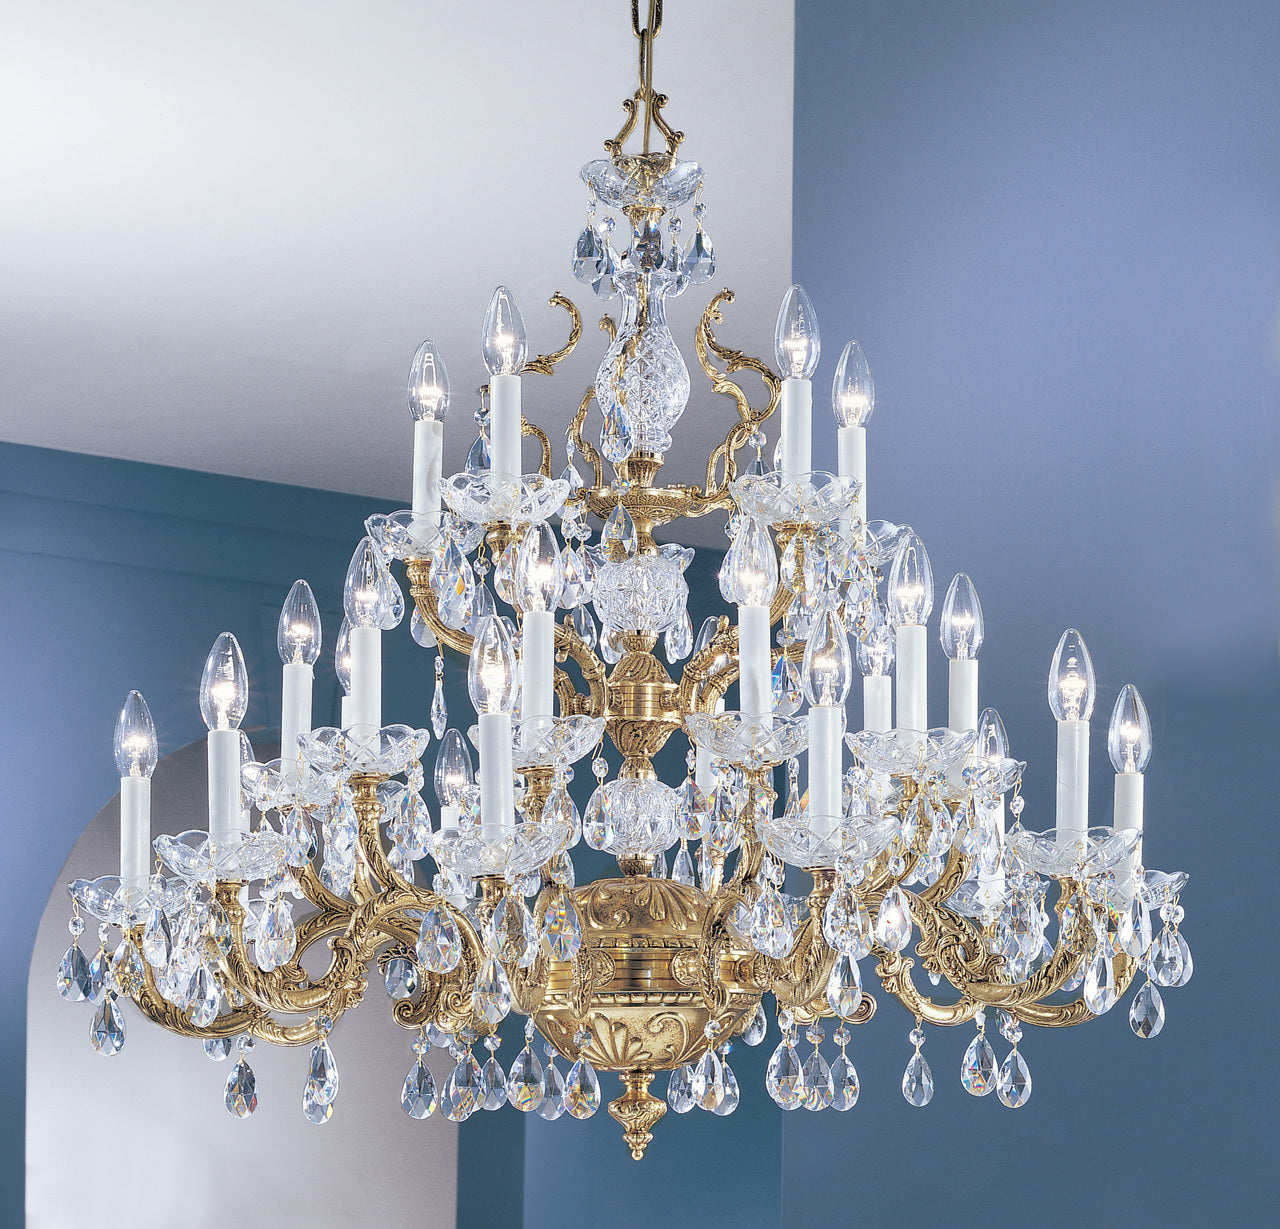 Classic Lighting 5535 RB SC Madrid Crystal/Cast Brass Chandelier in Roman Bronze (Imported from Spain)